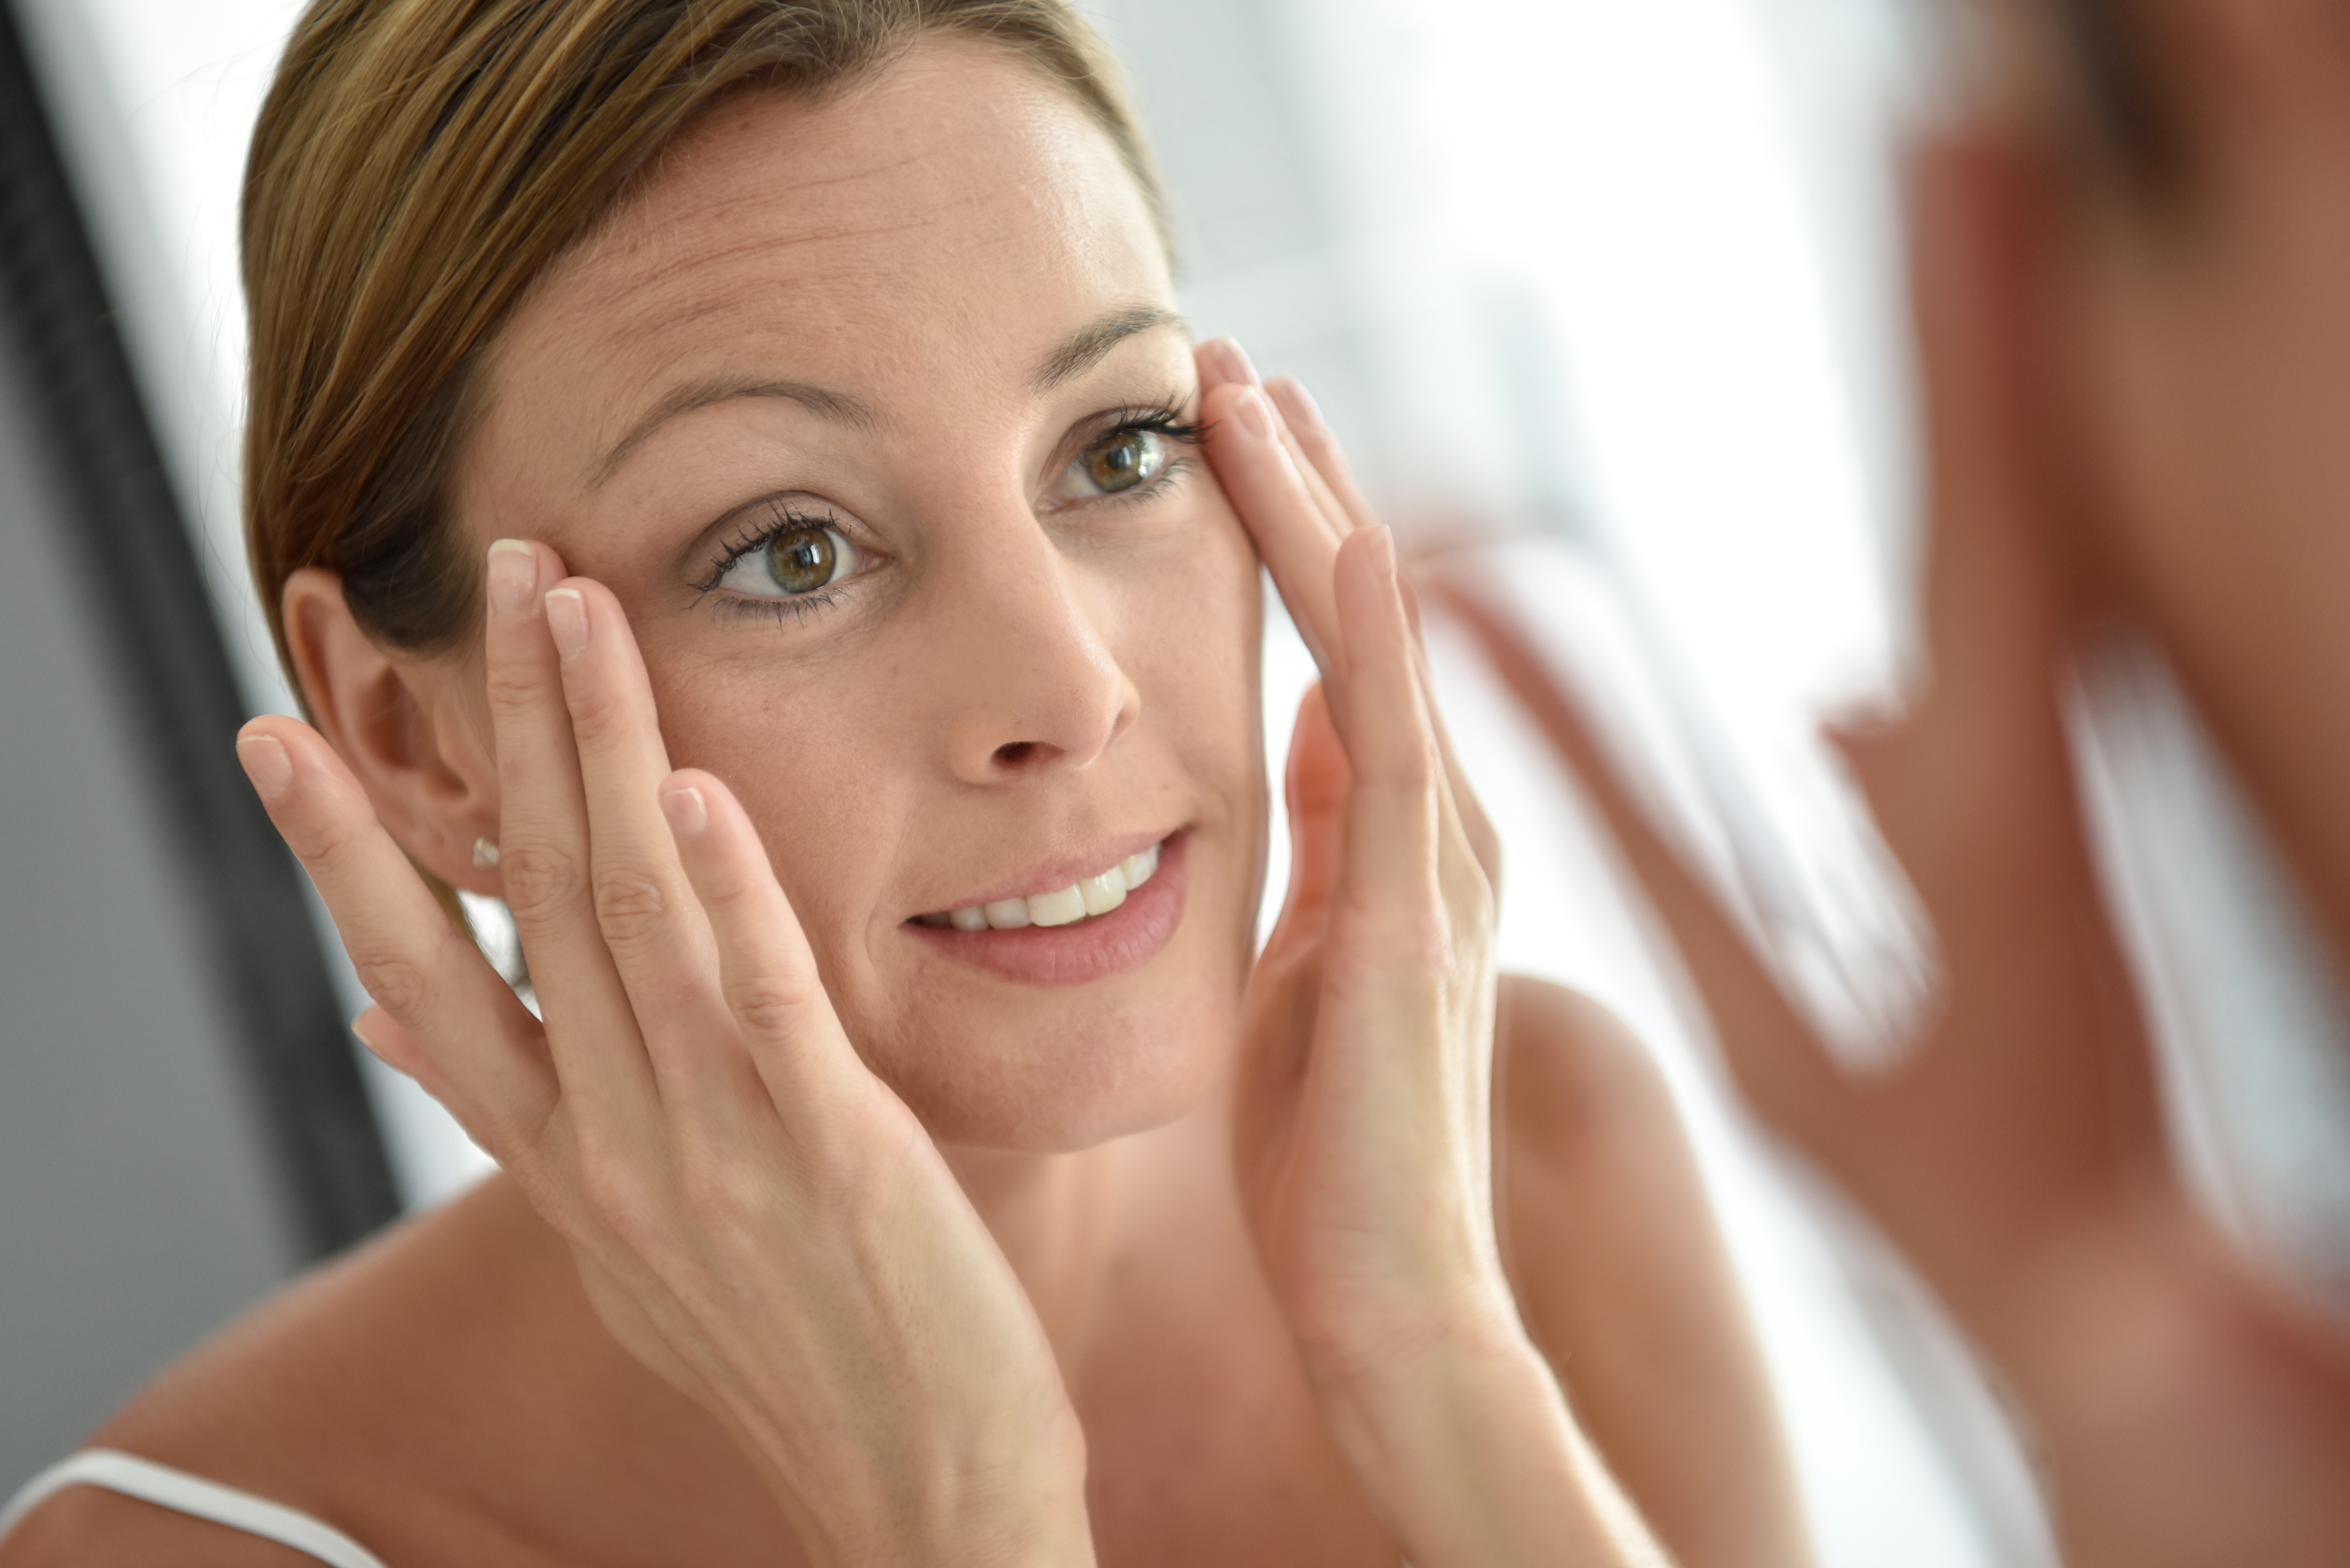 Why You Should Use Anti-Age Wrinkle Cream